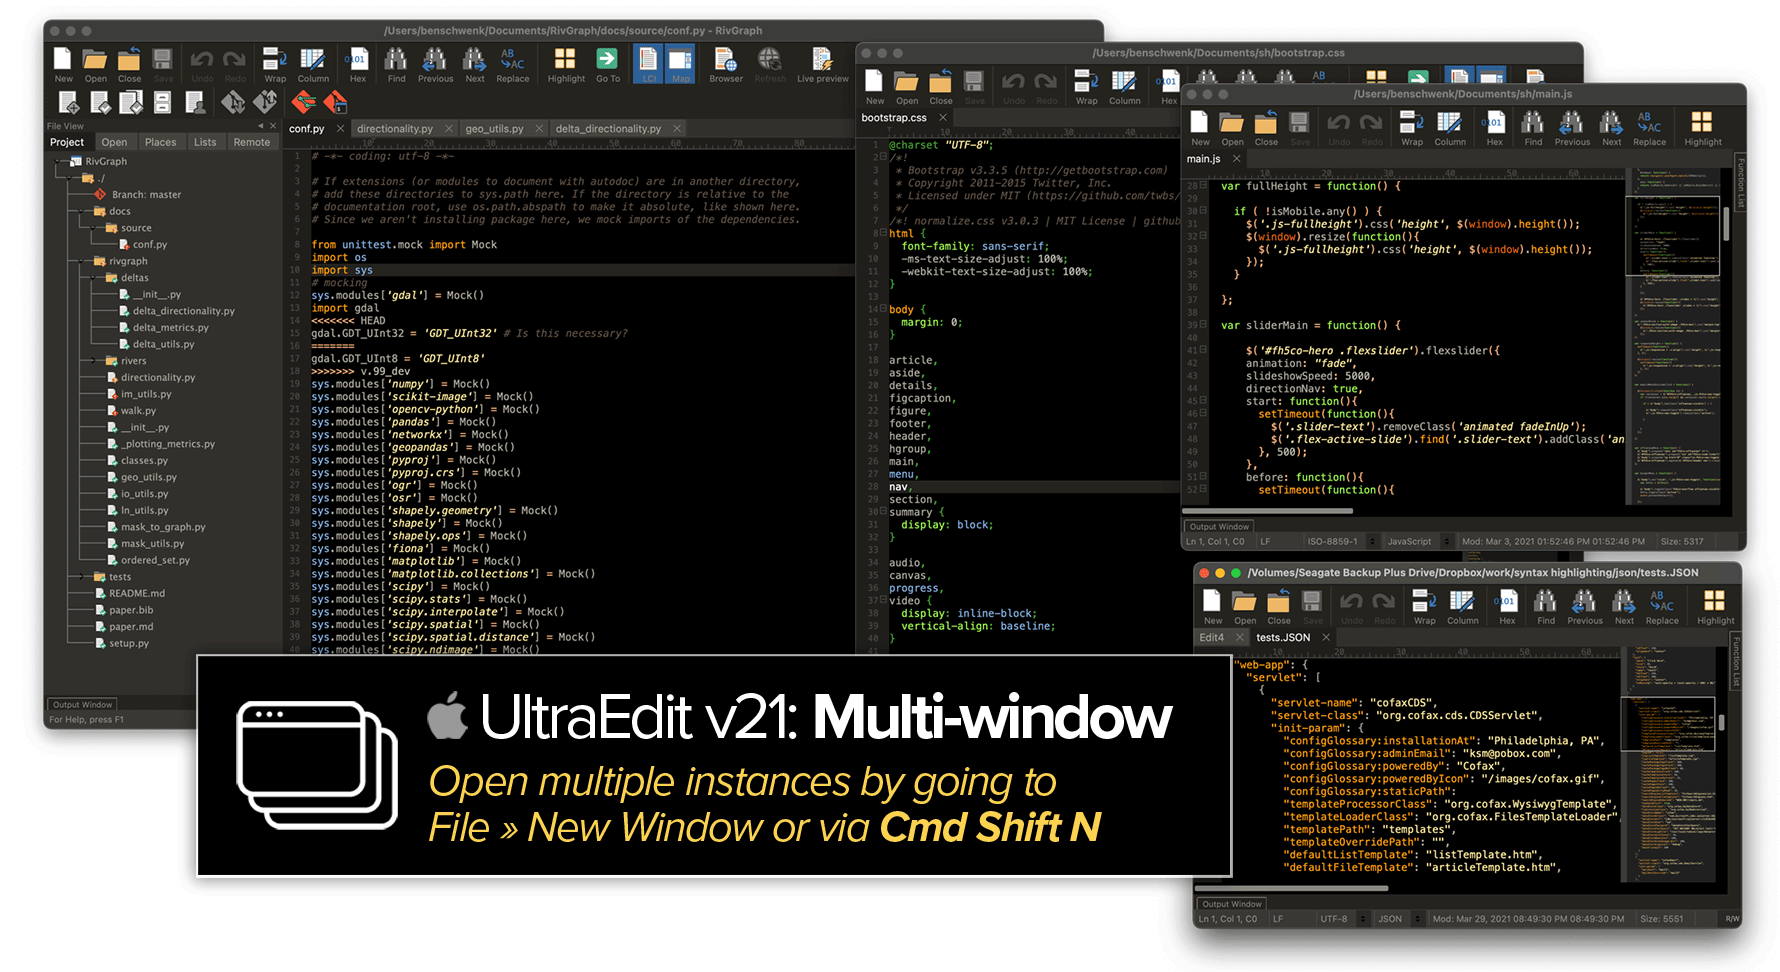 UltraEdit Mac v21 now available